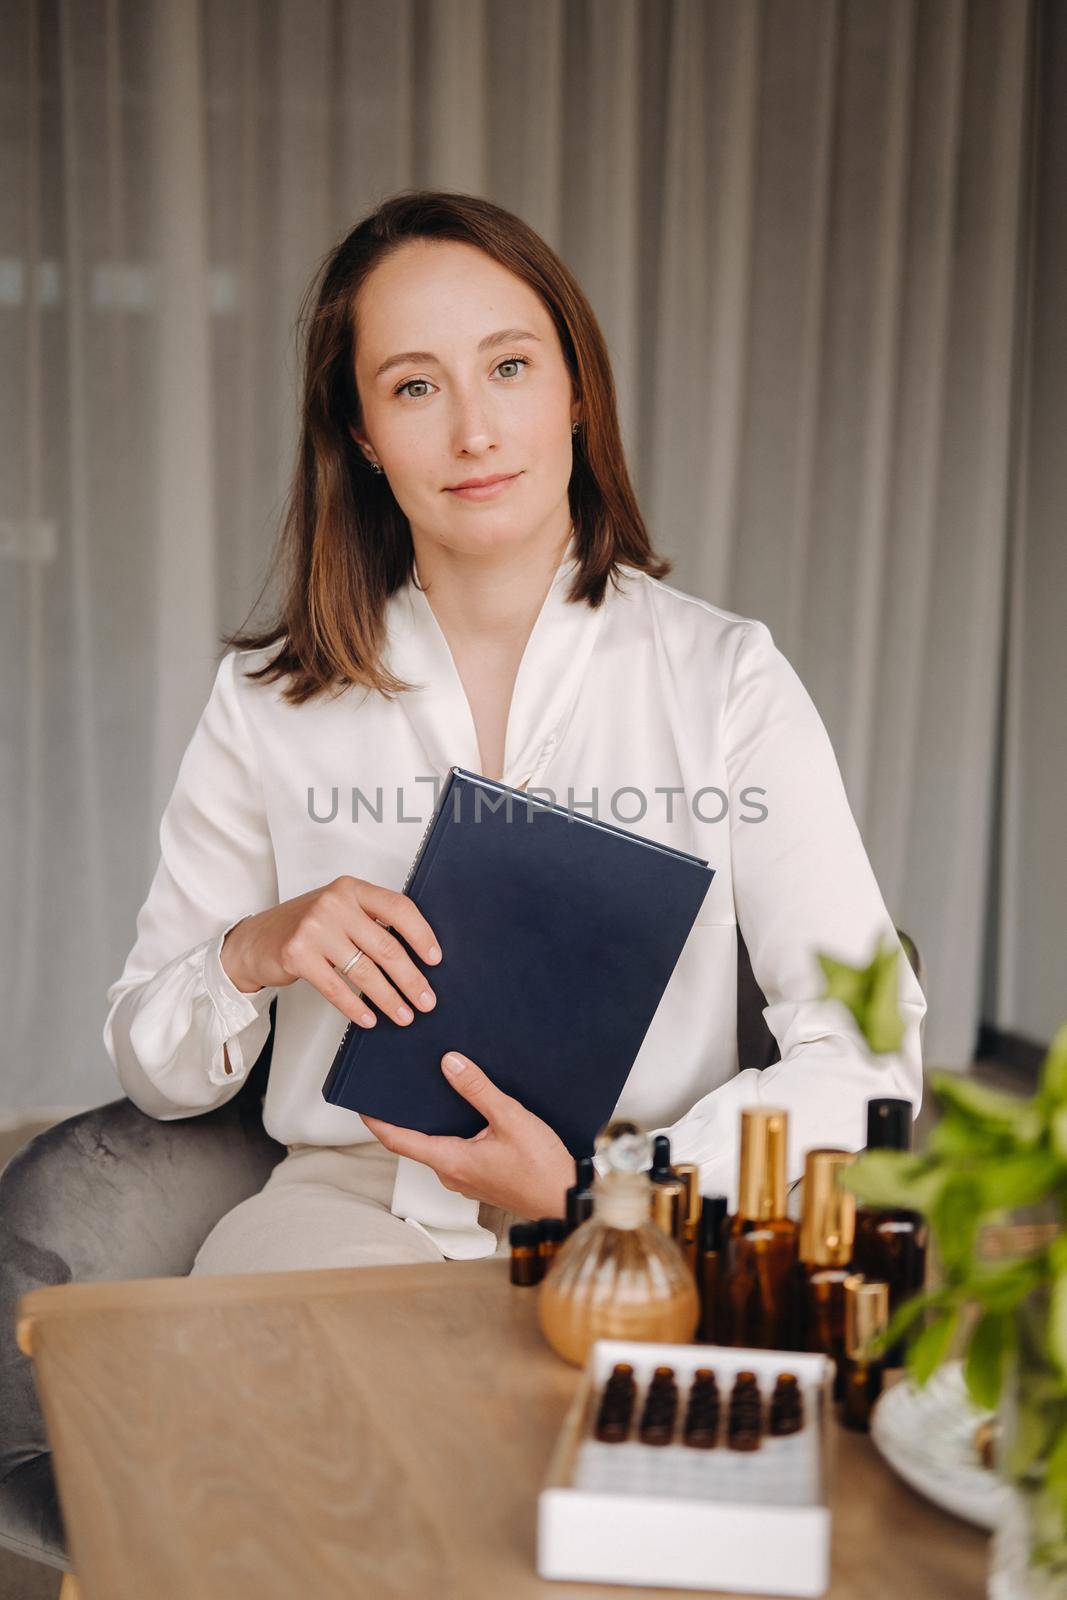 portrait of a smiling girl-woman sitting in an armchair. An aromatherapist in a white blouse is sitting in the office.